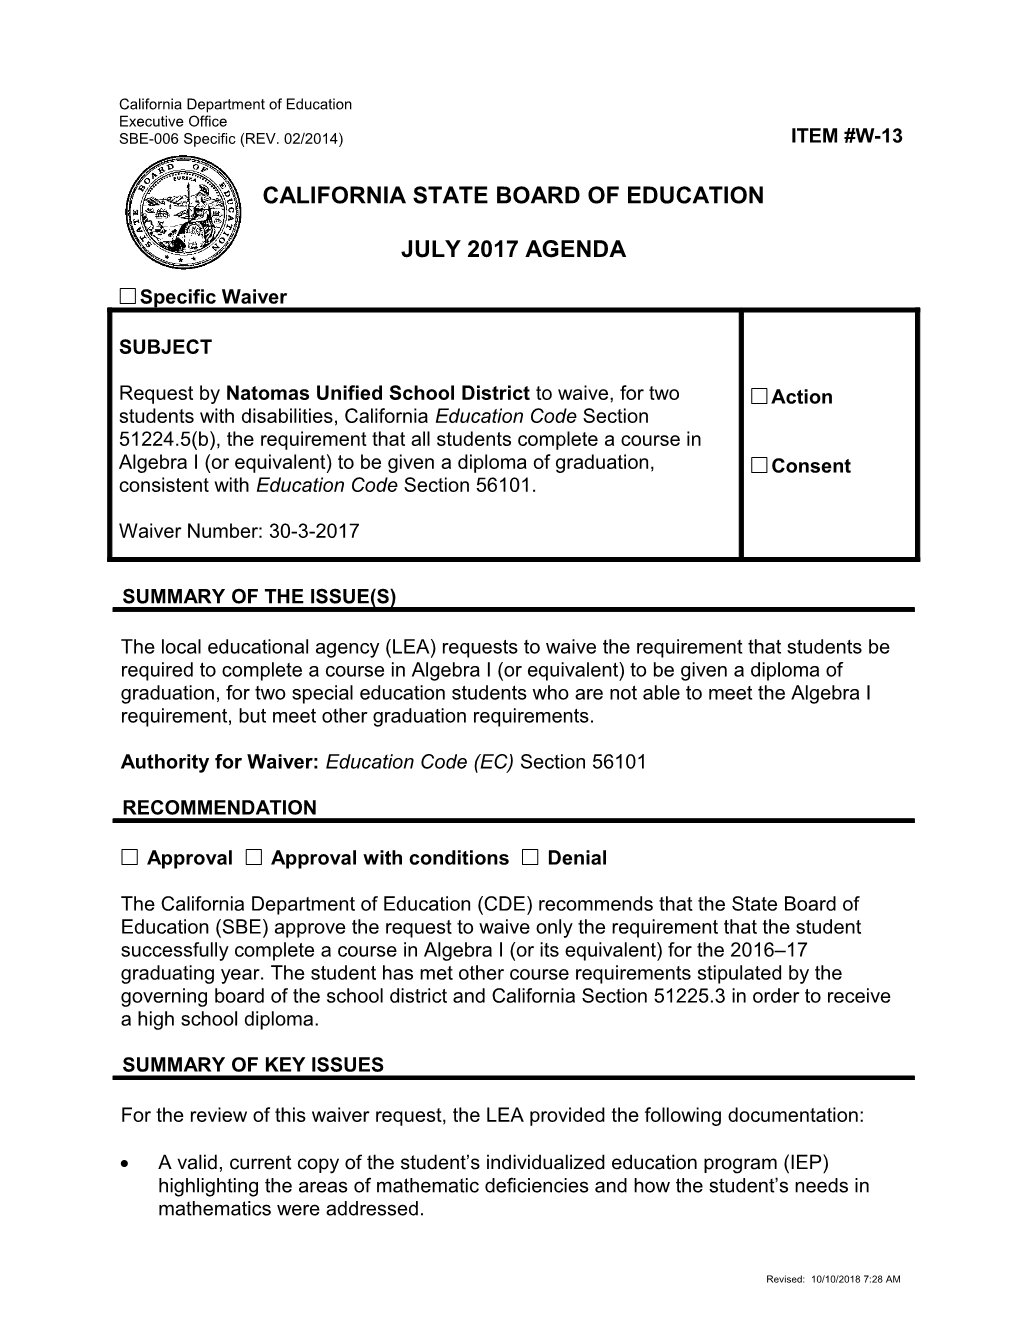 July 2017 Waiver Item W-13 - Meeting Agendas (CA State Board of Education)